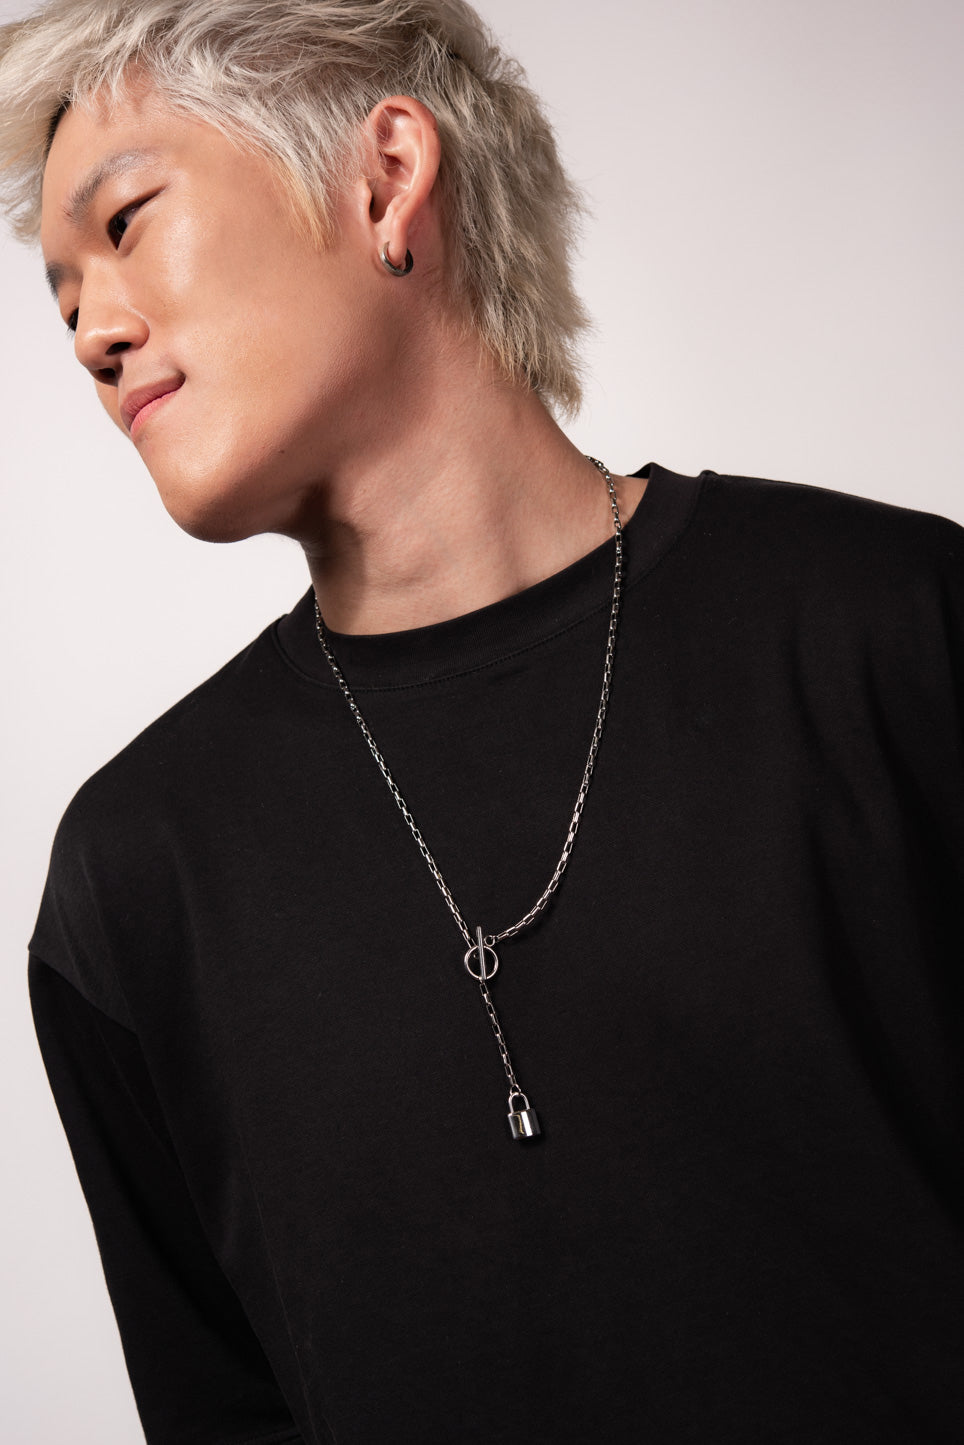 Stainless Steel Paper Clip Chain Necklace with Lock Pendant